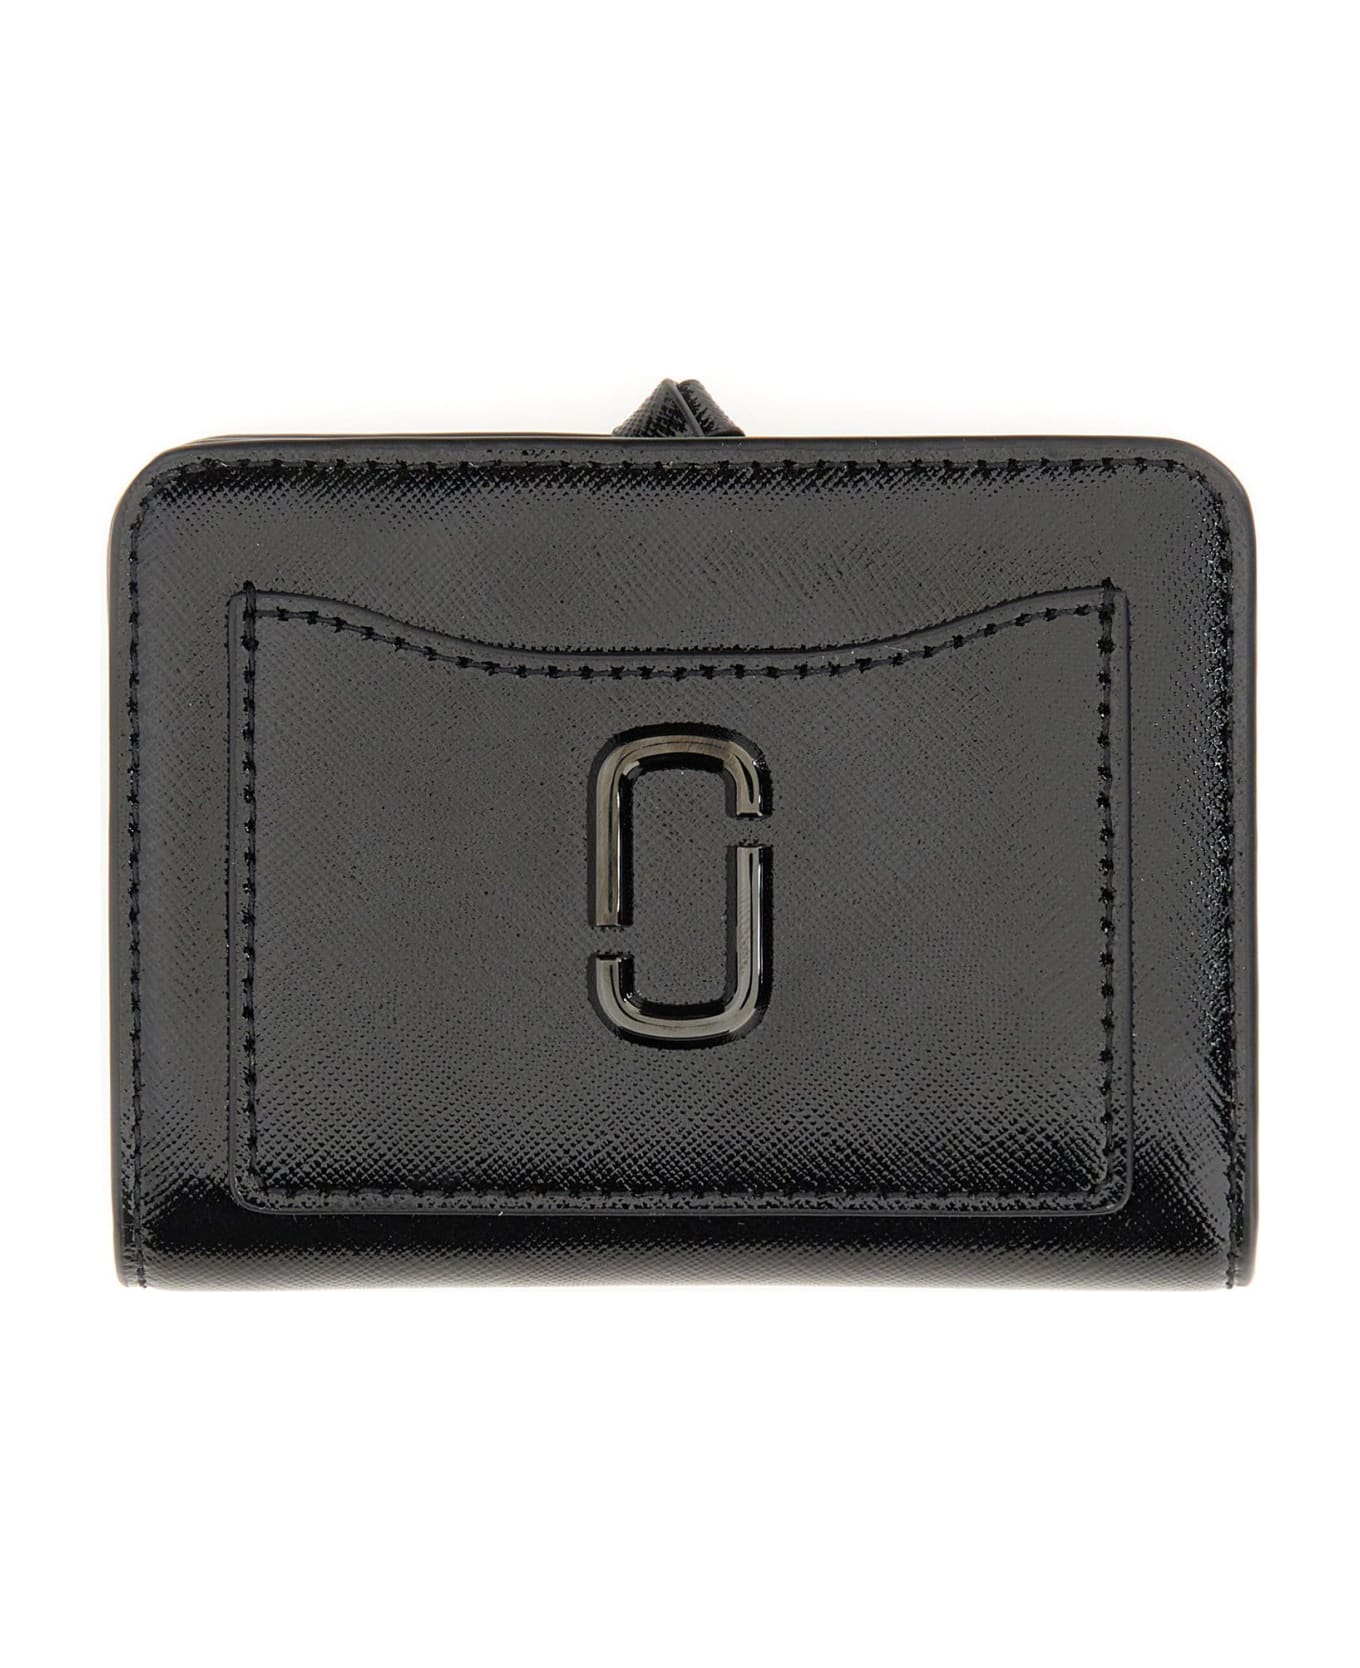 Marc Jacobs The Mini Compact Wallet In Black Leather - BLACK 財布